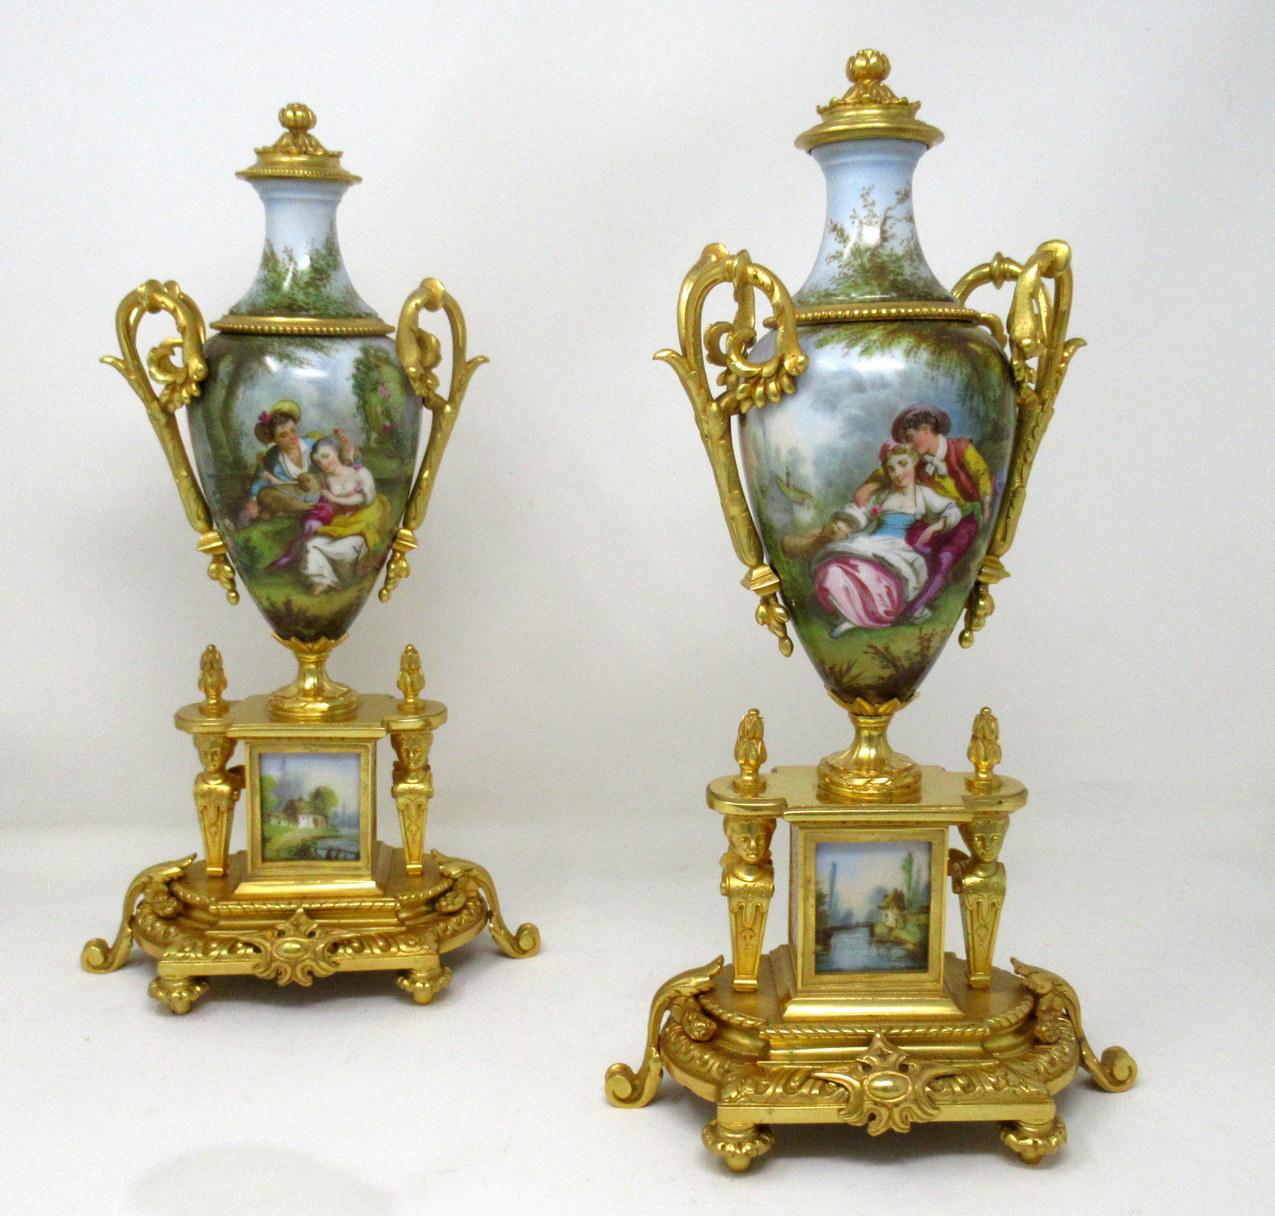 Stunning pair of French Sevres soft paste hand decorated porcelain and Ormolu twin scroll handle table or mantle urns of traditional form and of outstanding quality, made during the last half of the 19th century. 

Each urn of ovoid outline